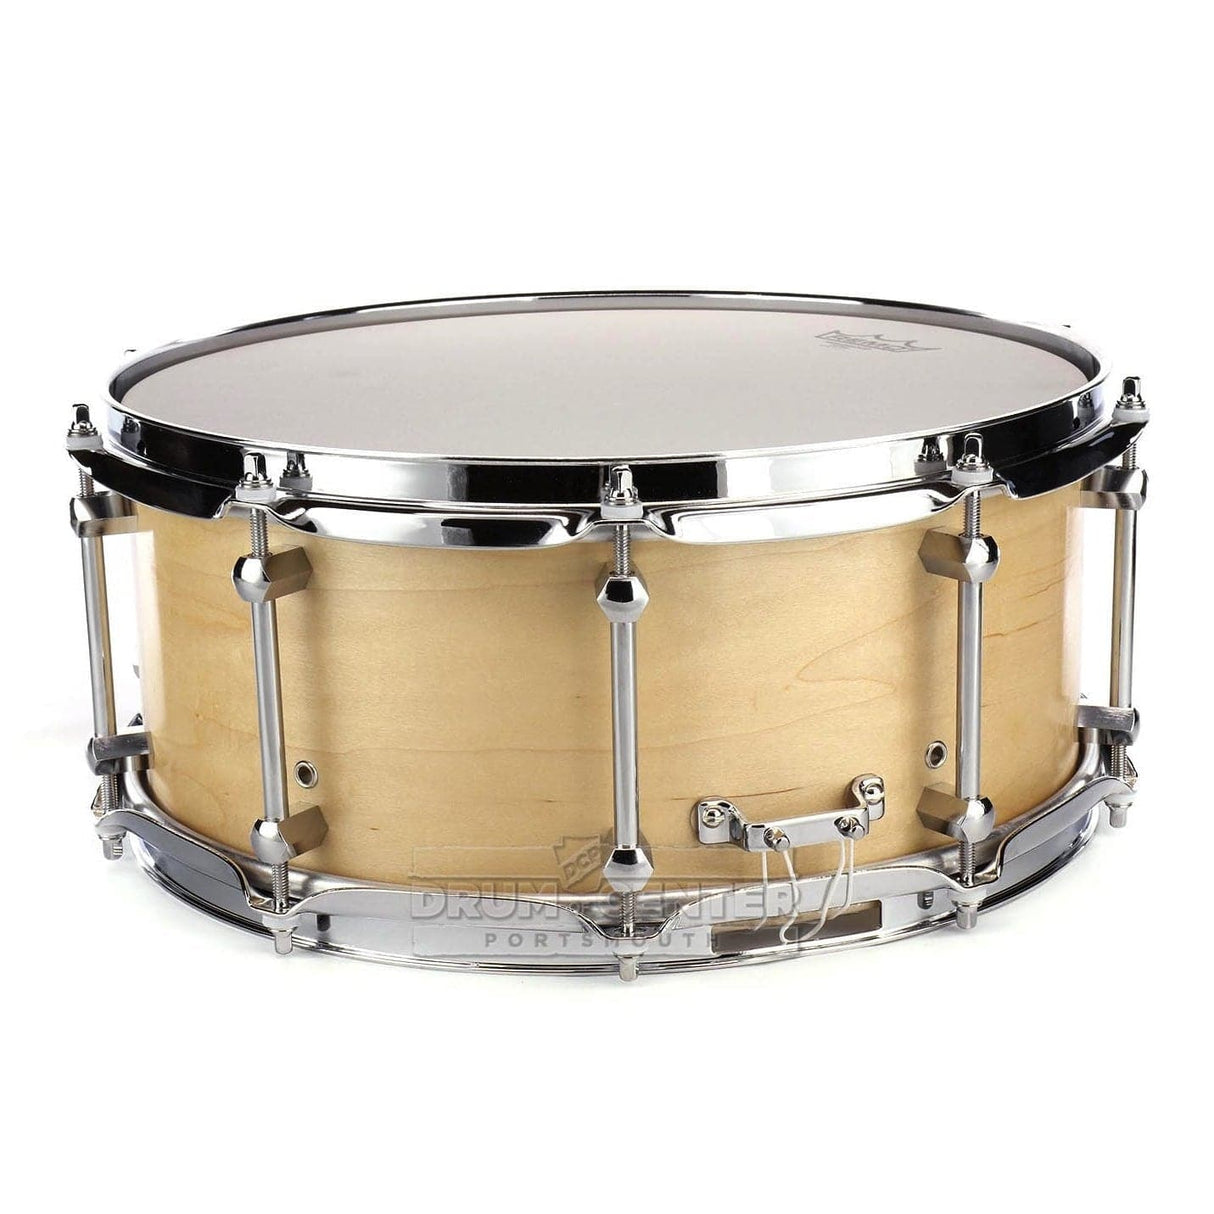 Noble & Cooley Horizon Snare Drum 14x6 Natural Oil